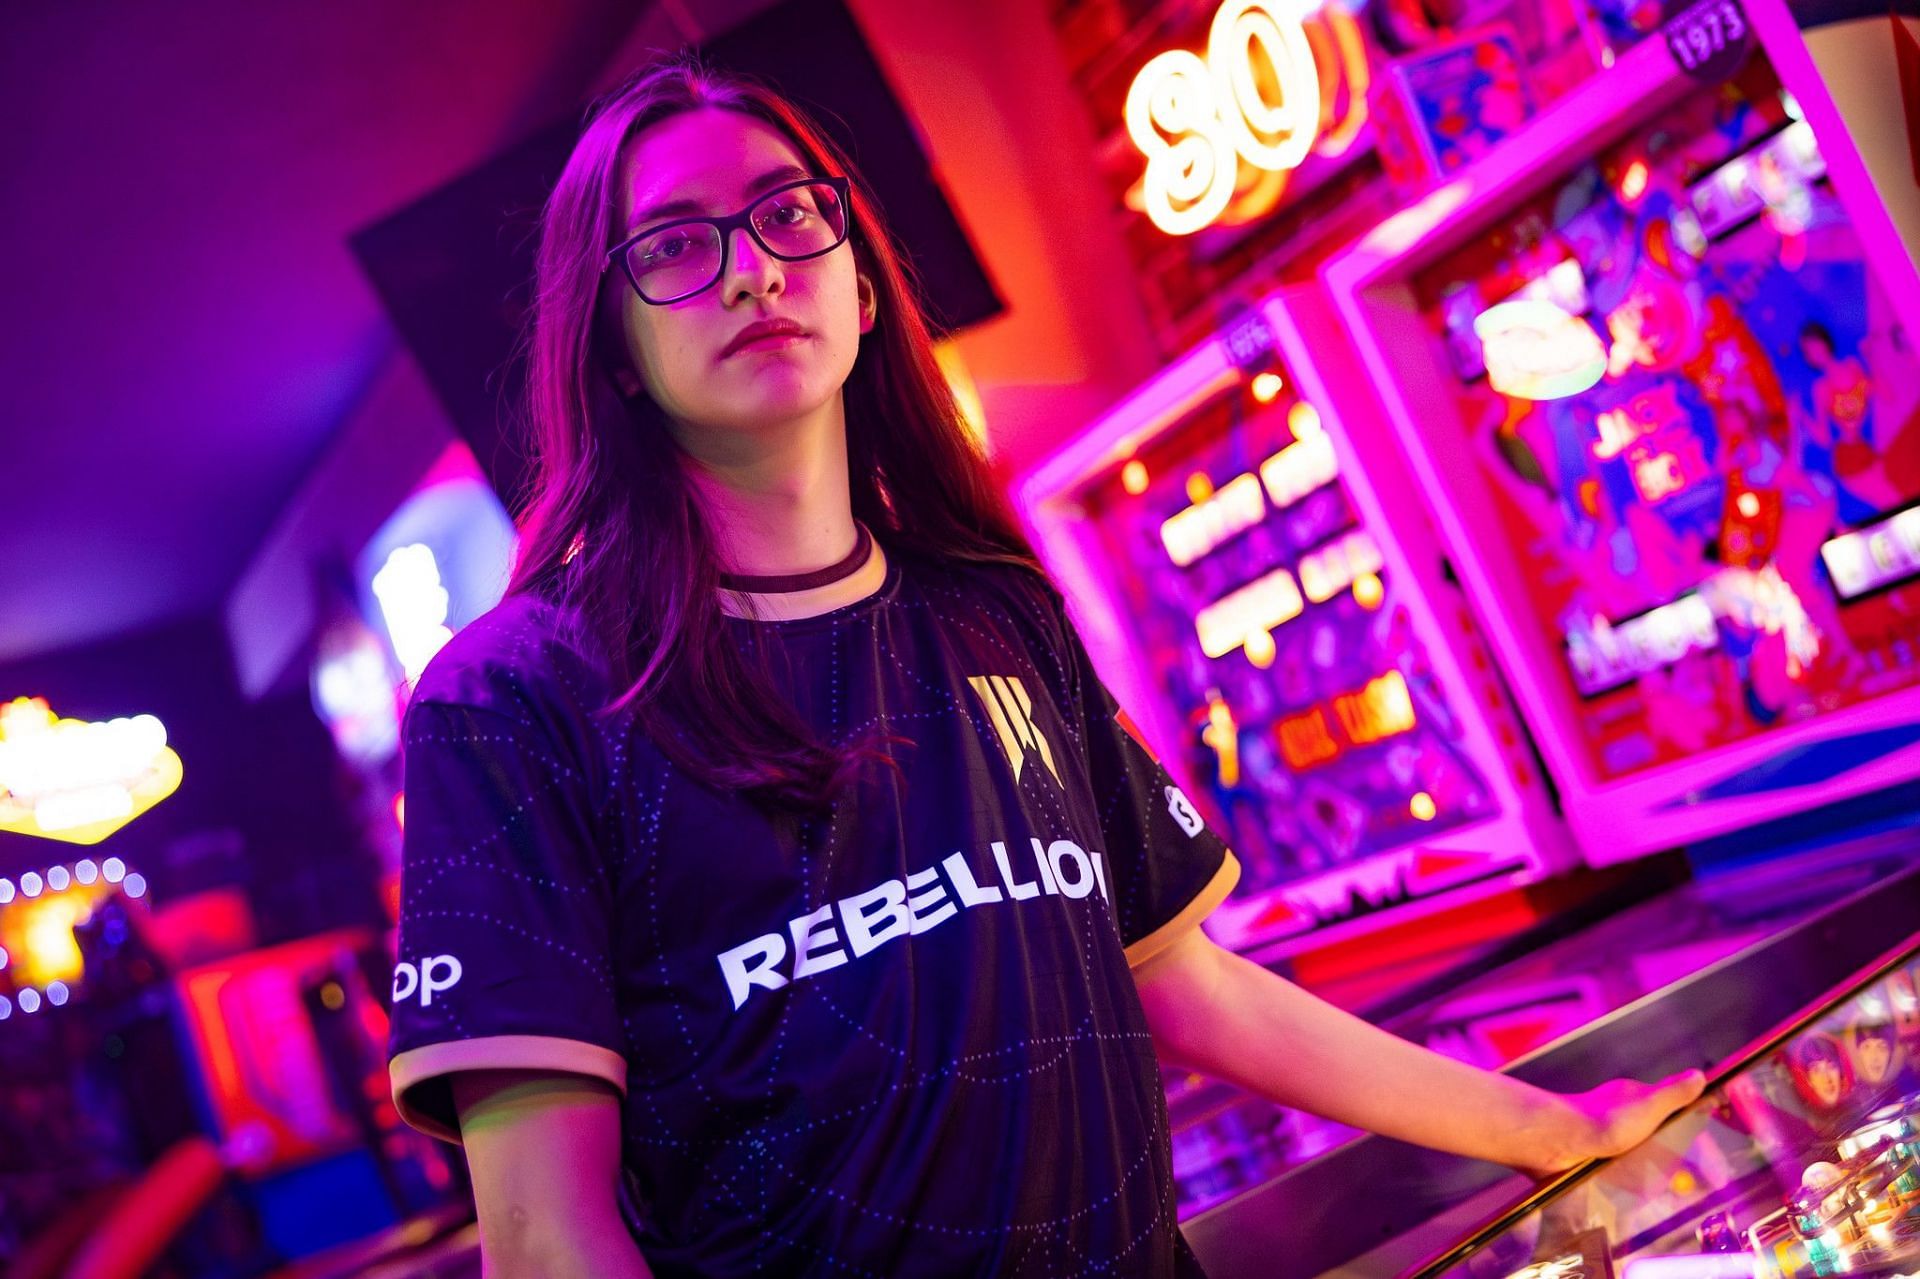 Sources: Bvoy set to join Shopify Rebellion : r/leagueoflegends